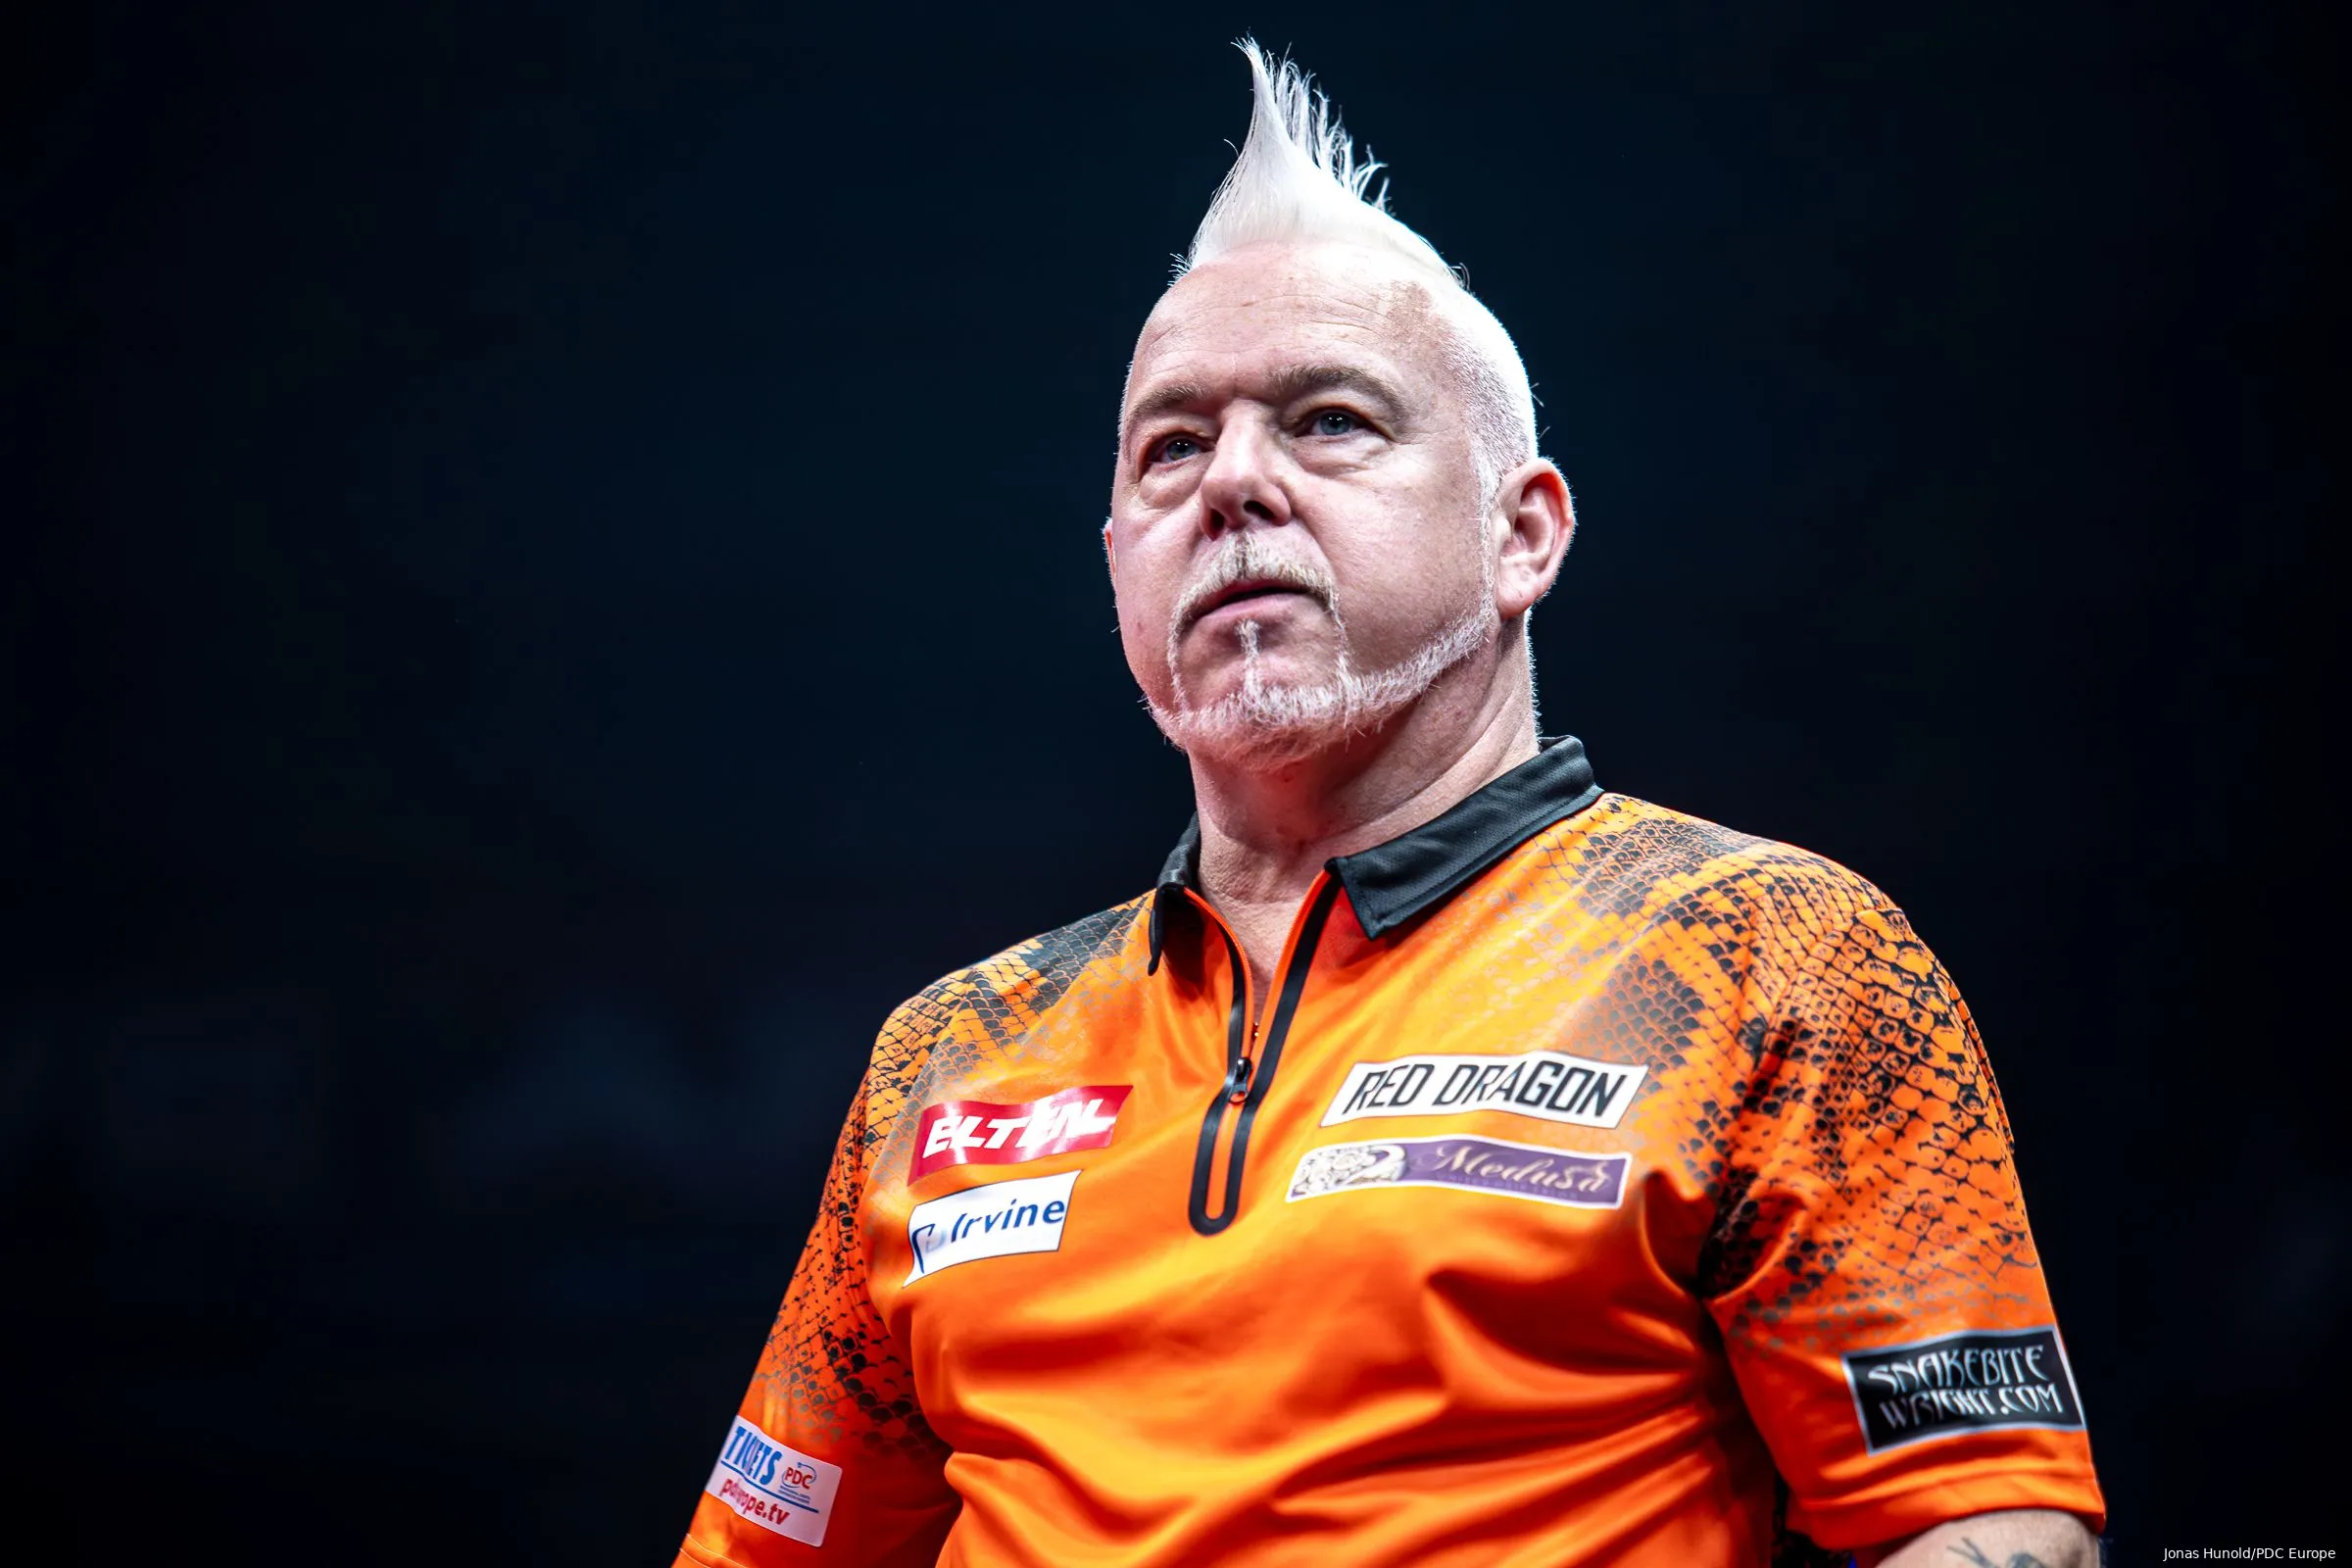 peter wright 2